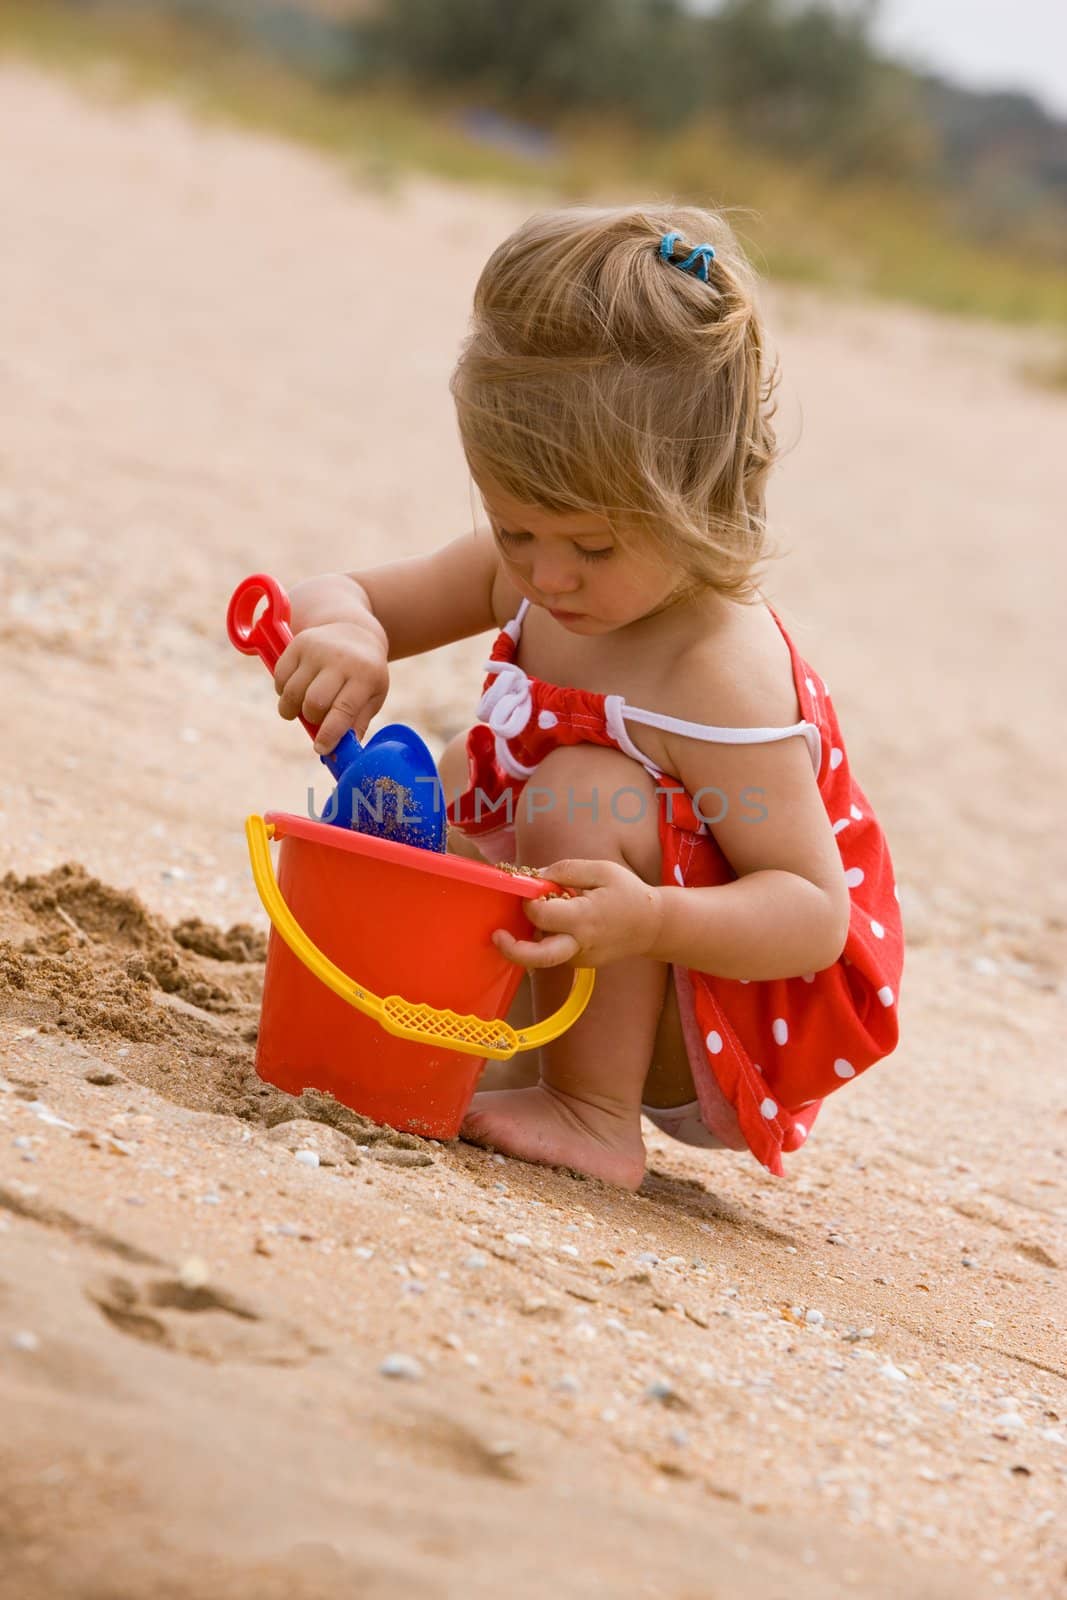 people series: little girl play with sand